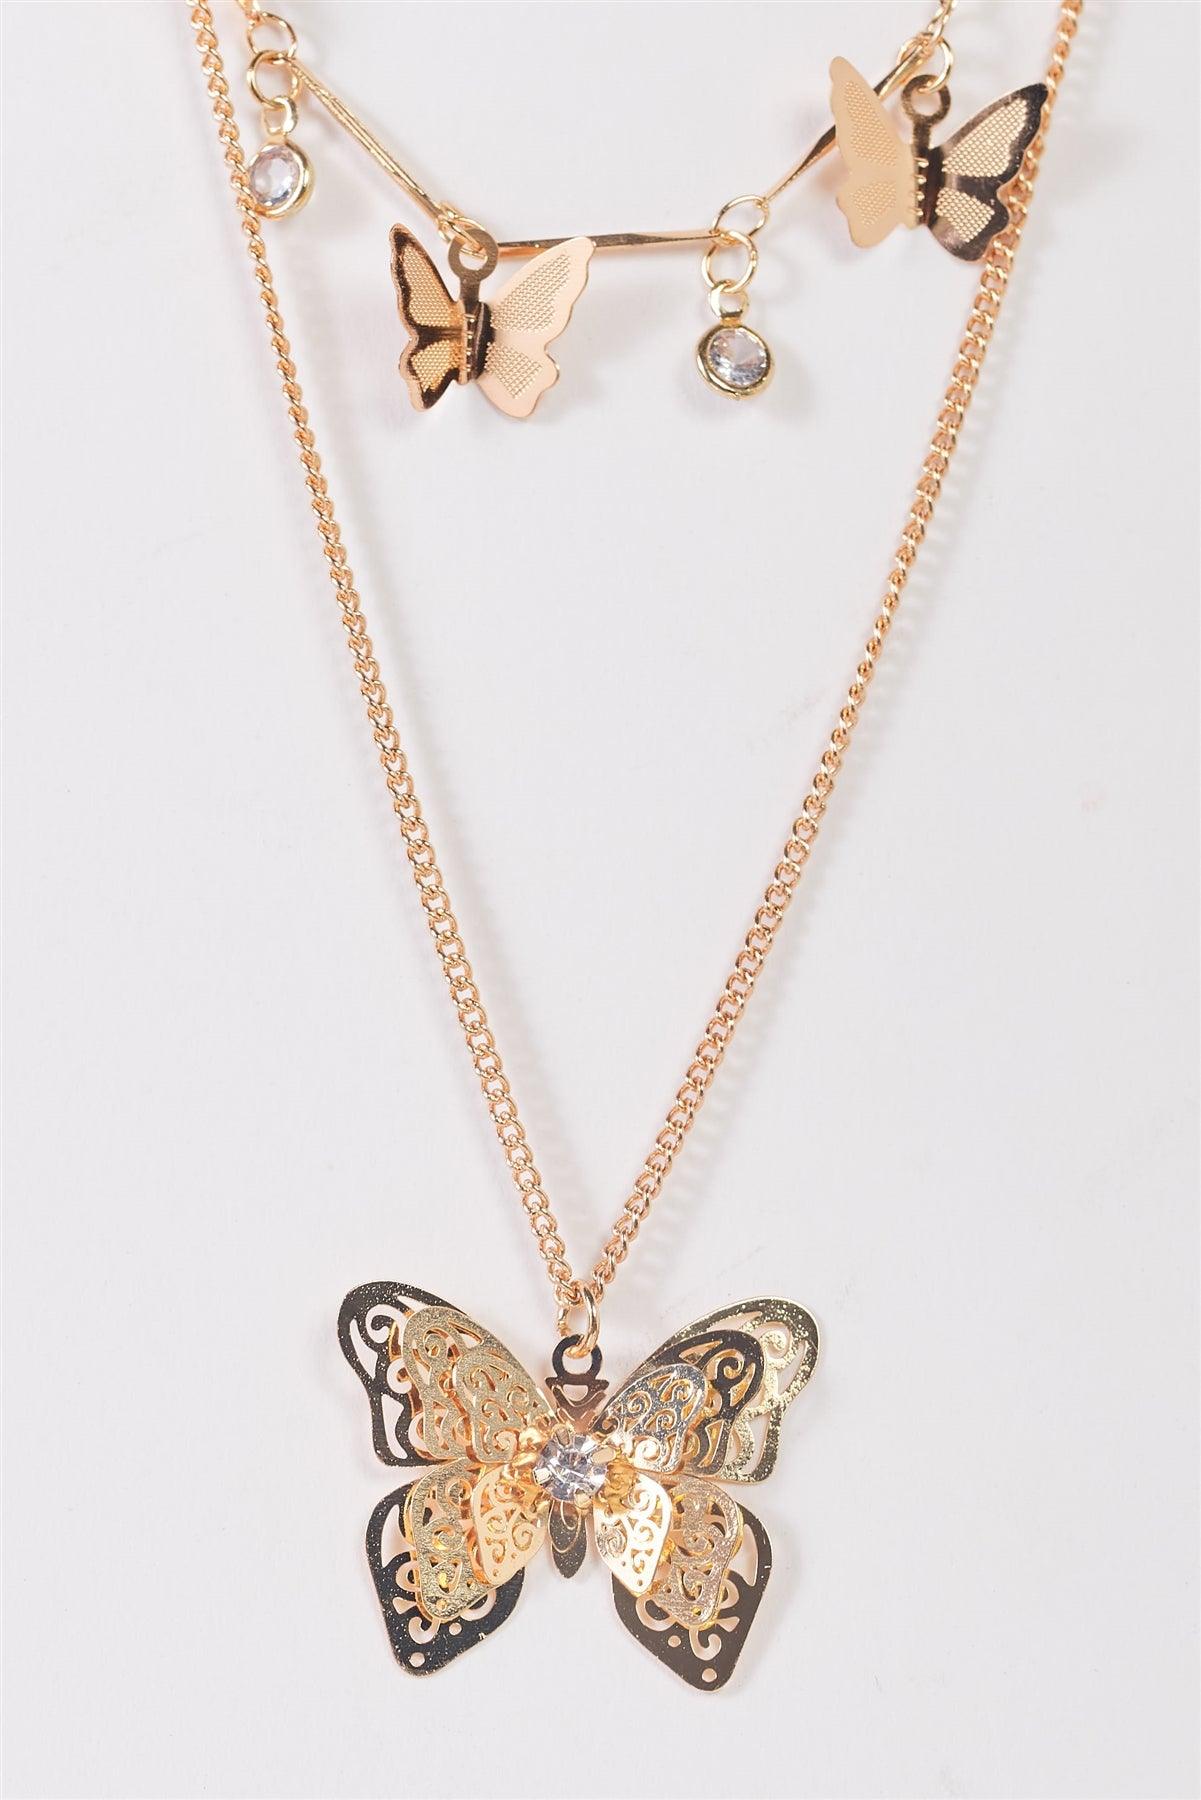 Gold Double Chain With 3D Butterflies Pendants & Faux Crystals Necklace /3 Pieces